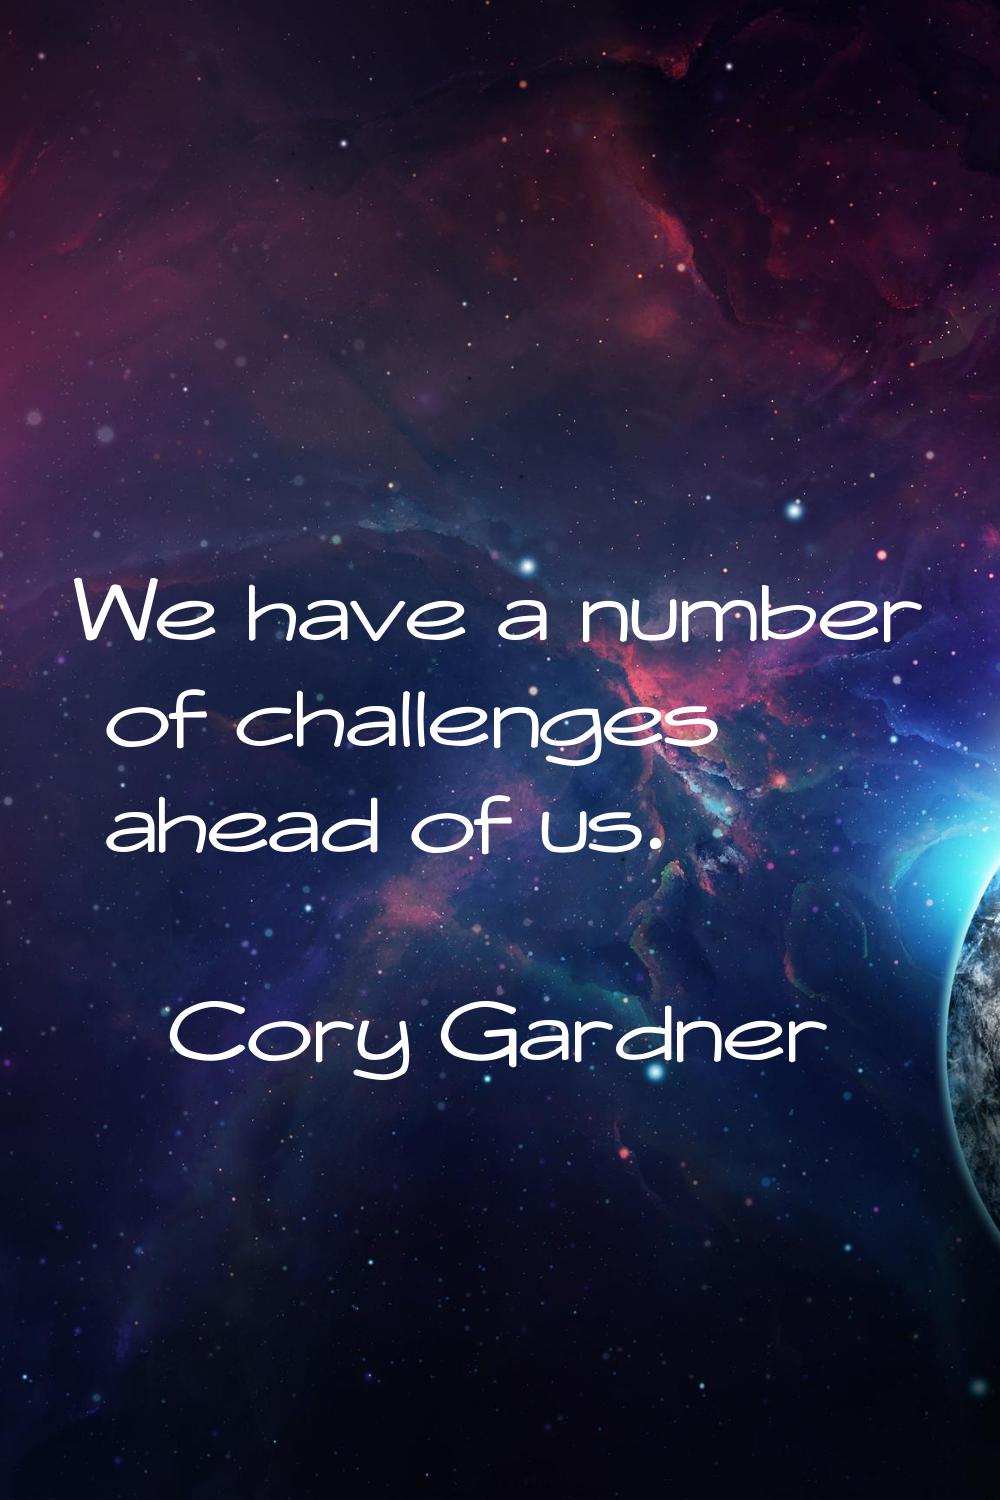 We have a number of challenges ahead of us.